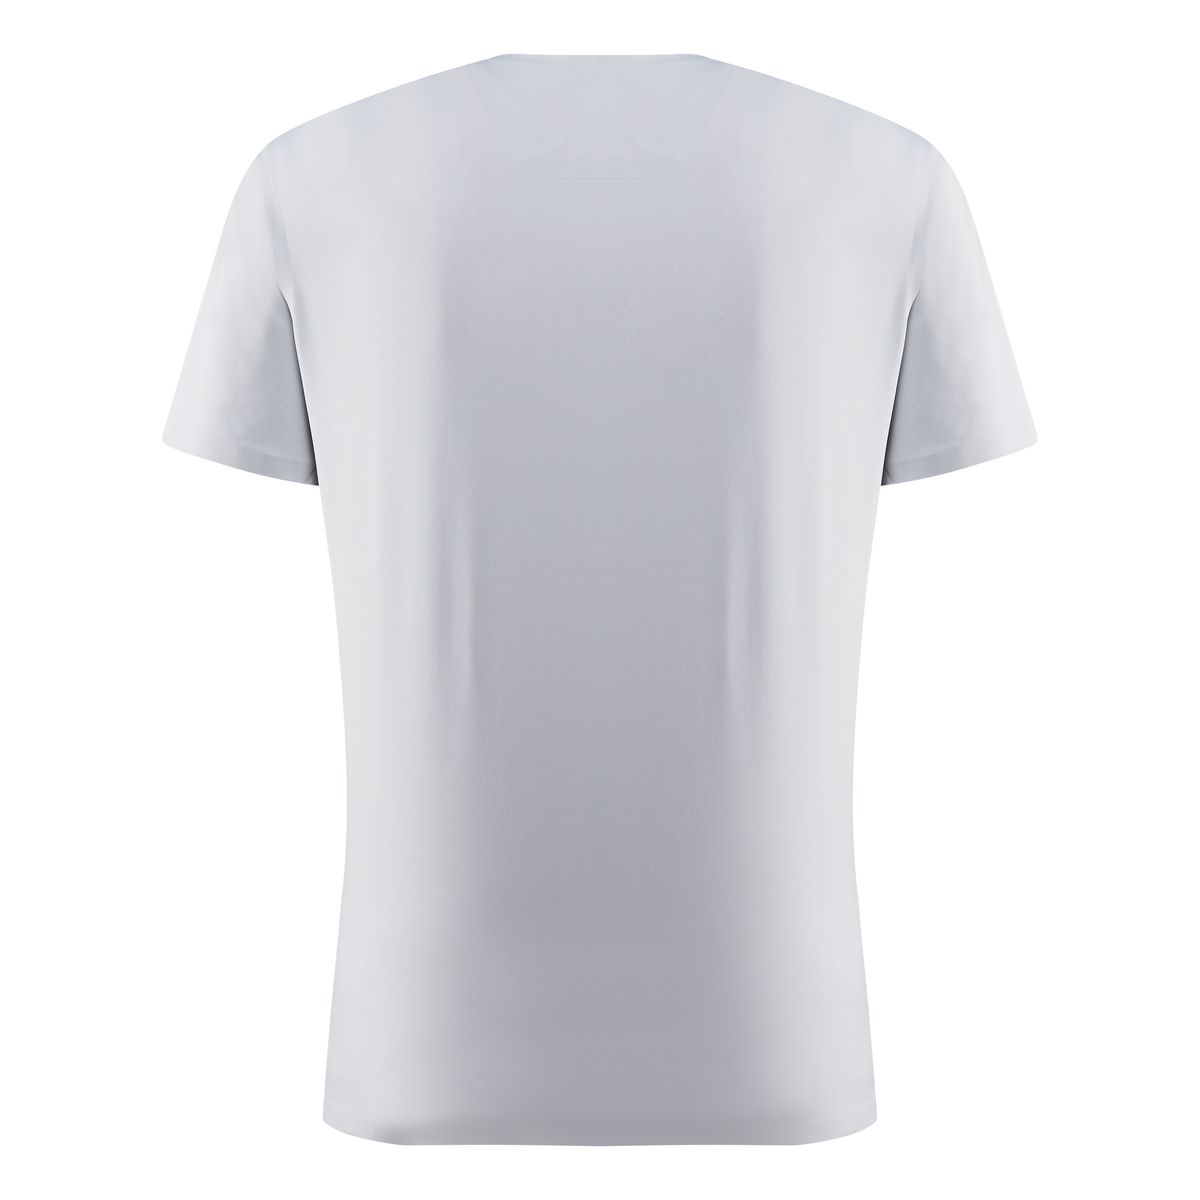 Buy China Wholesale Seamless Short Sleeve Tops And Matching High